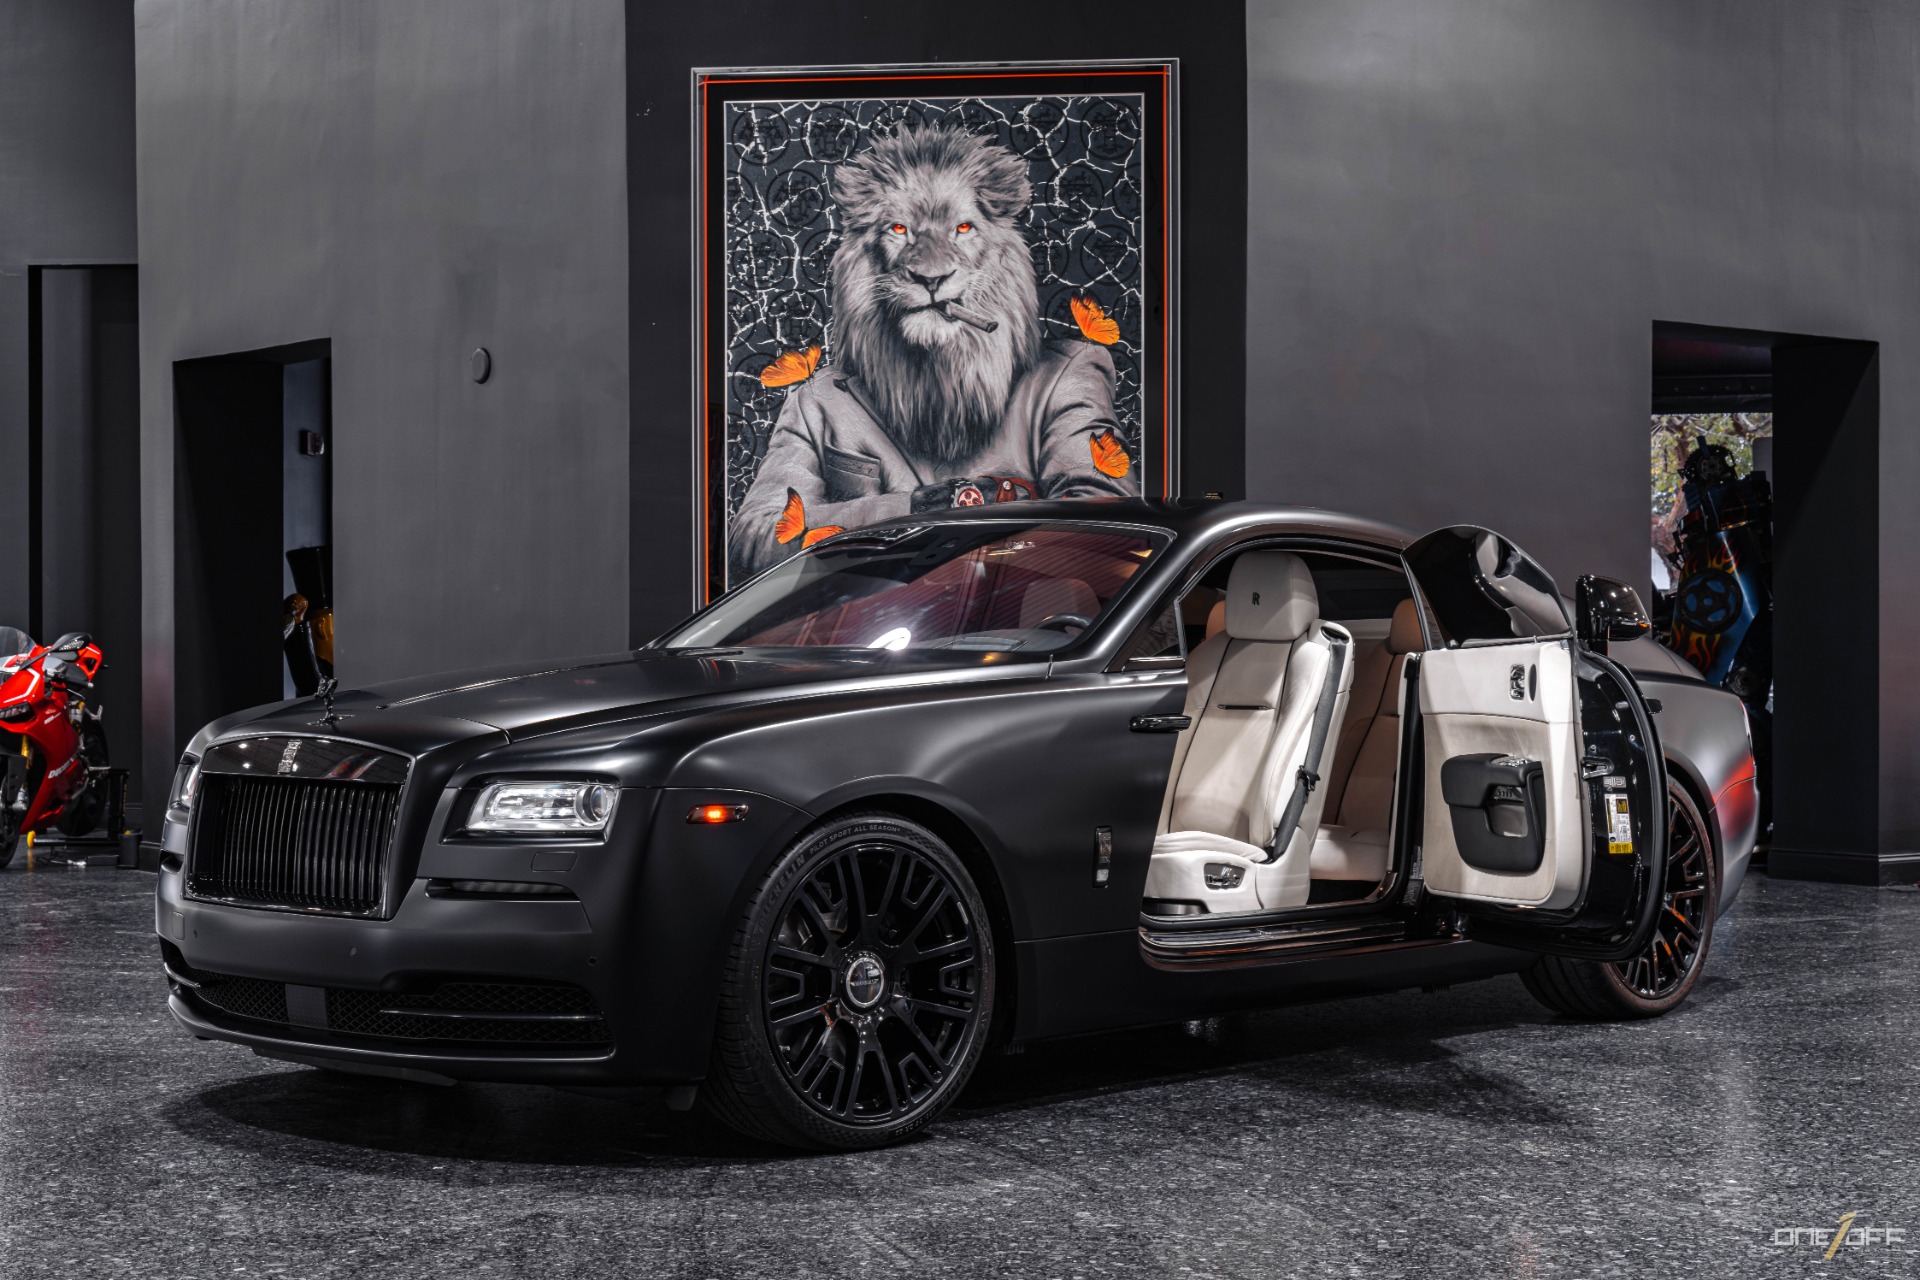 Used 2014 RollsRoyce Wraith High 369030 MSRP Mansory Starlight Driver  Assist 3 Full Matte PPF For Sale Sold  Exotics Hunter Stock 22215